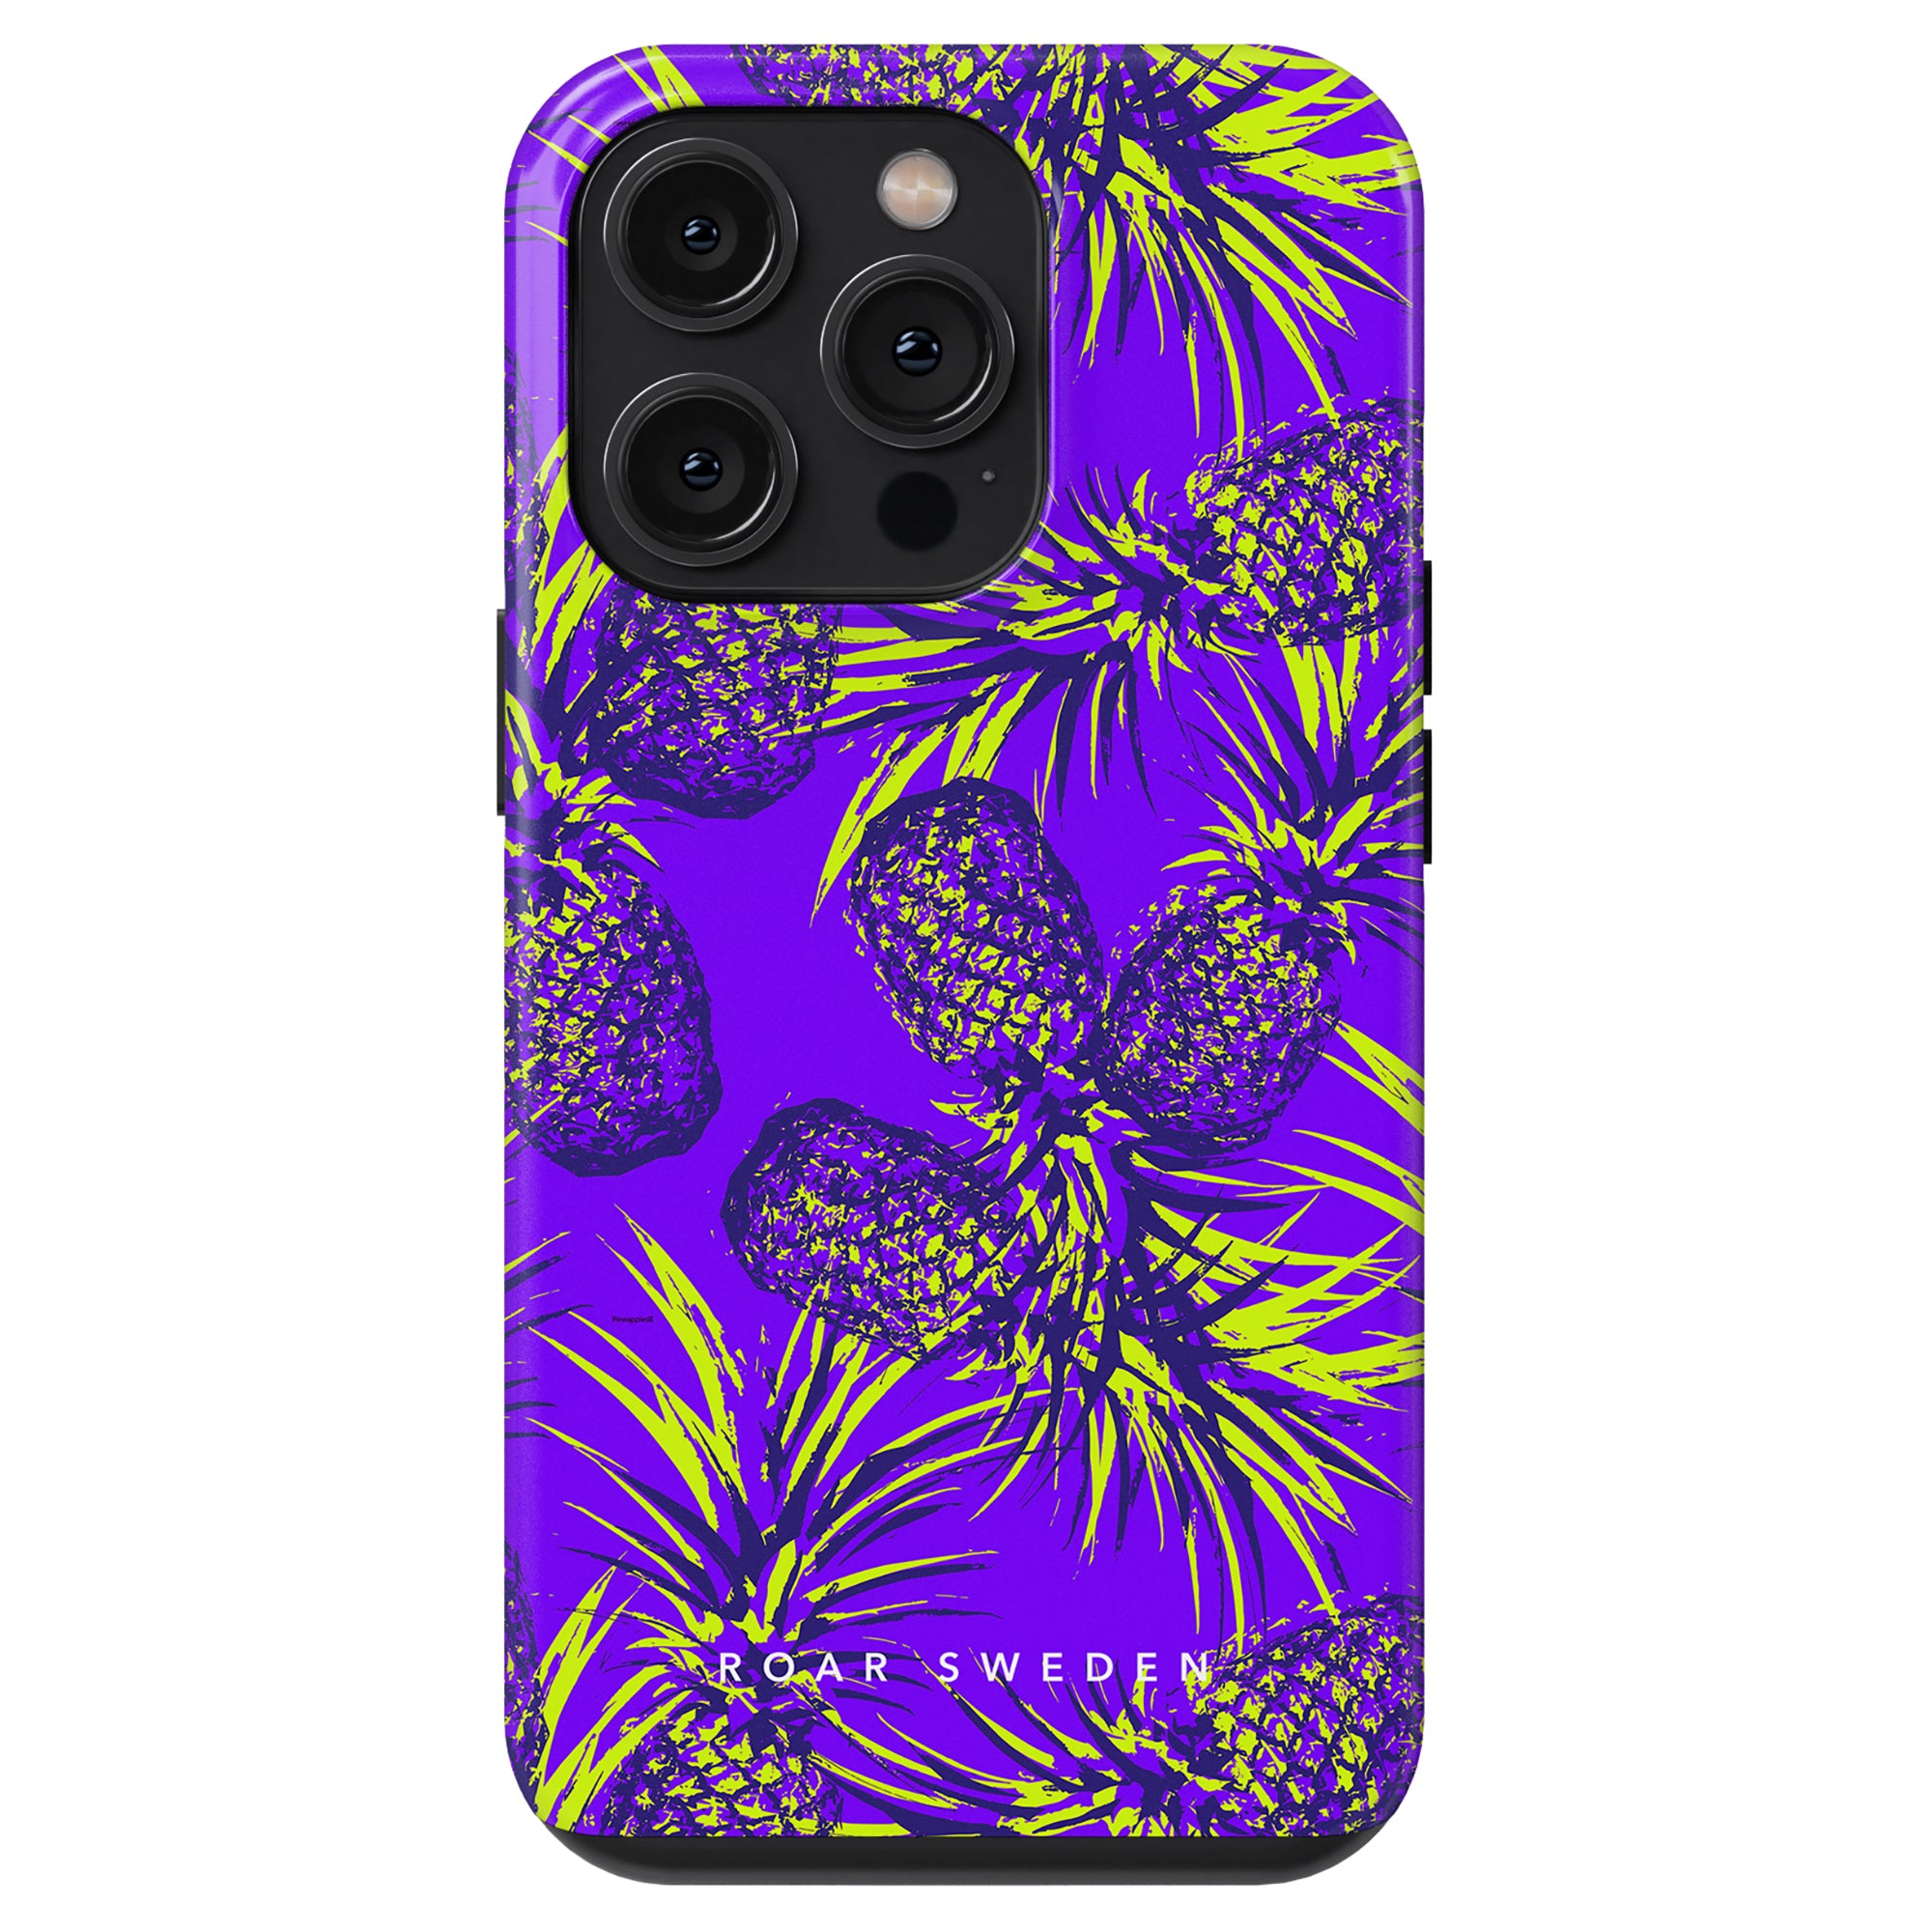 A Comosus - Tough Case with a vibrant purple and yellow ananasmönster design and a camera cutout for an iPhone model, part of the sommar collection.